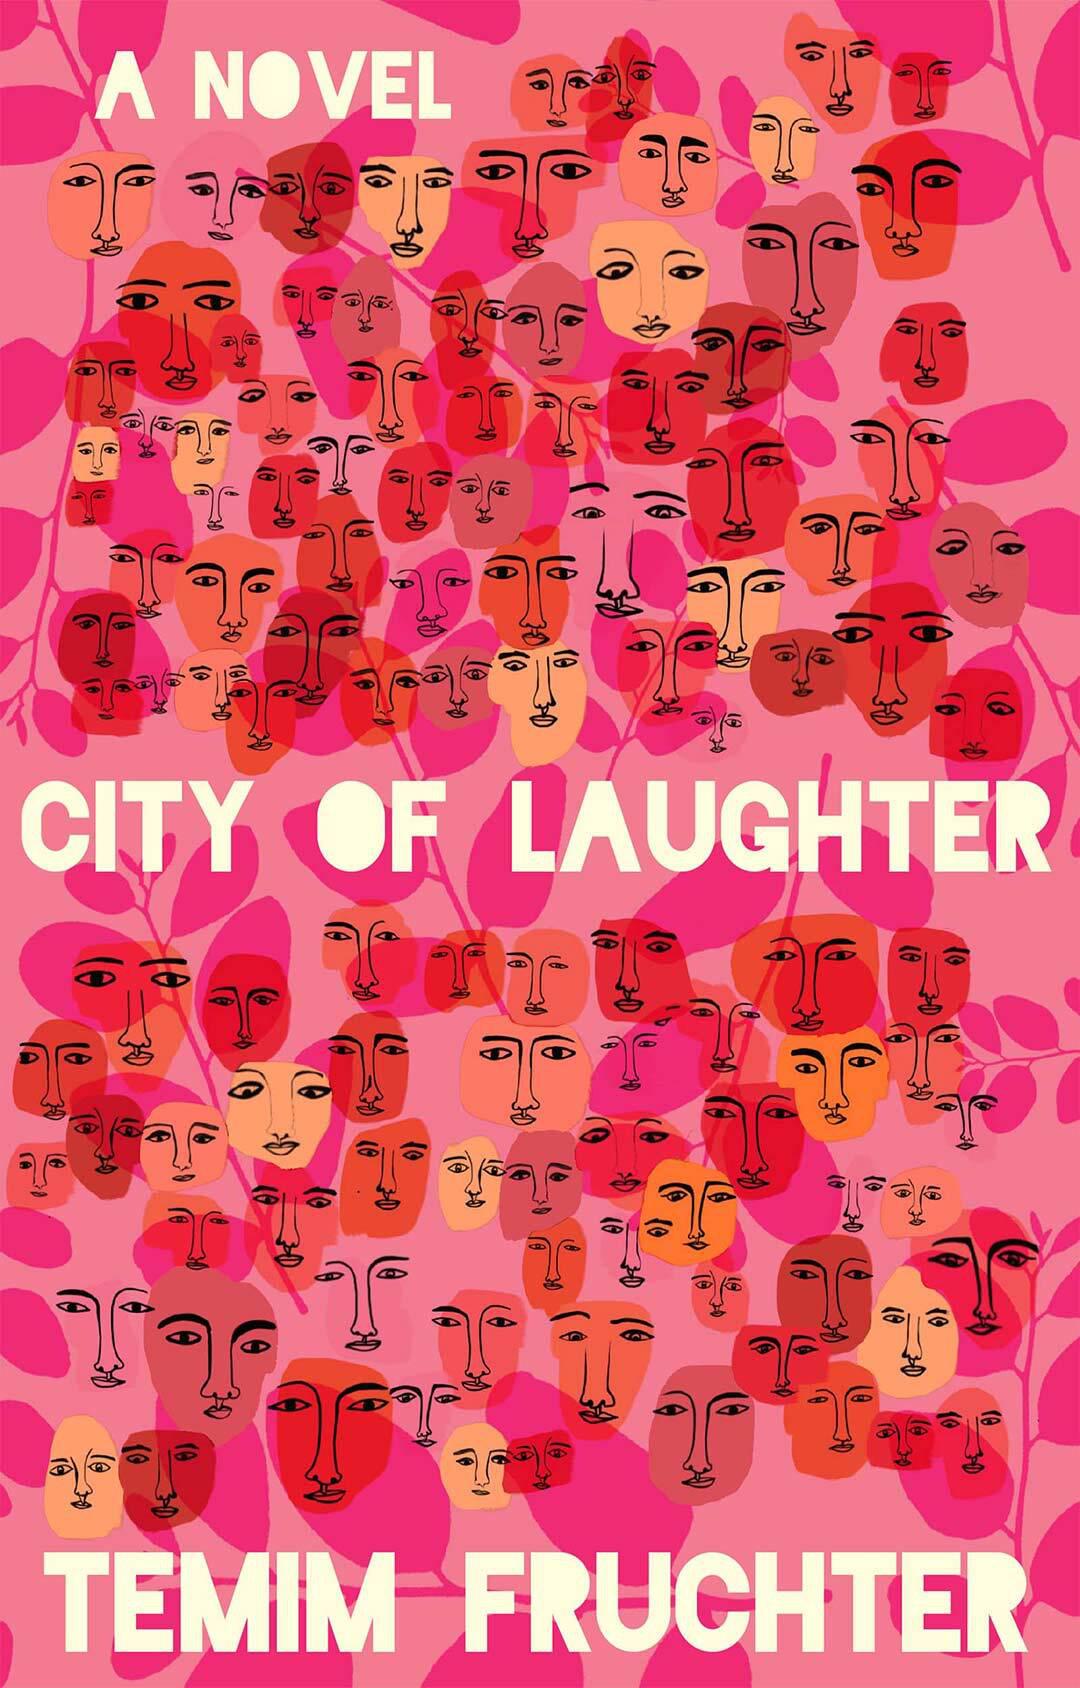 “City of Laughter” book cover